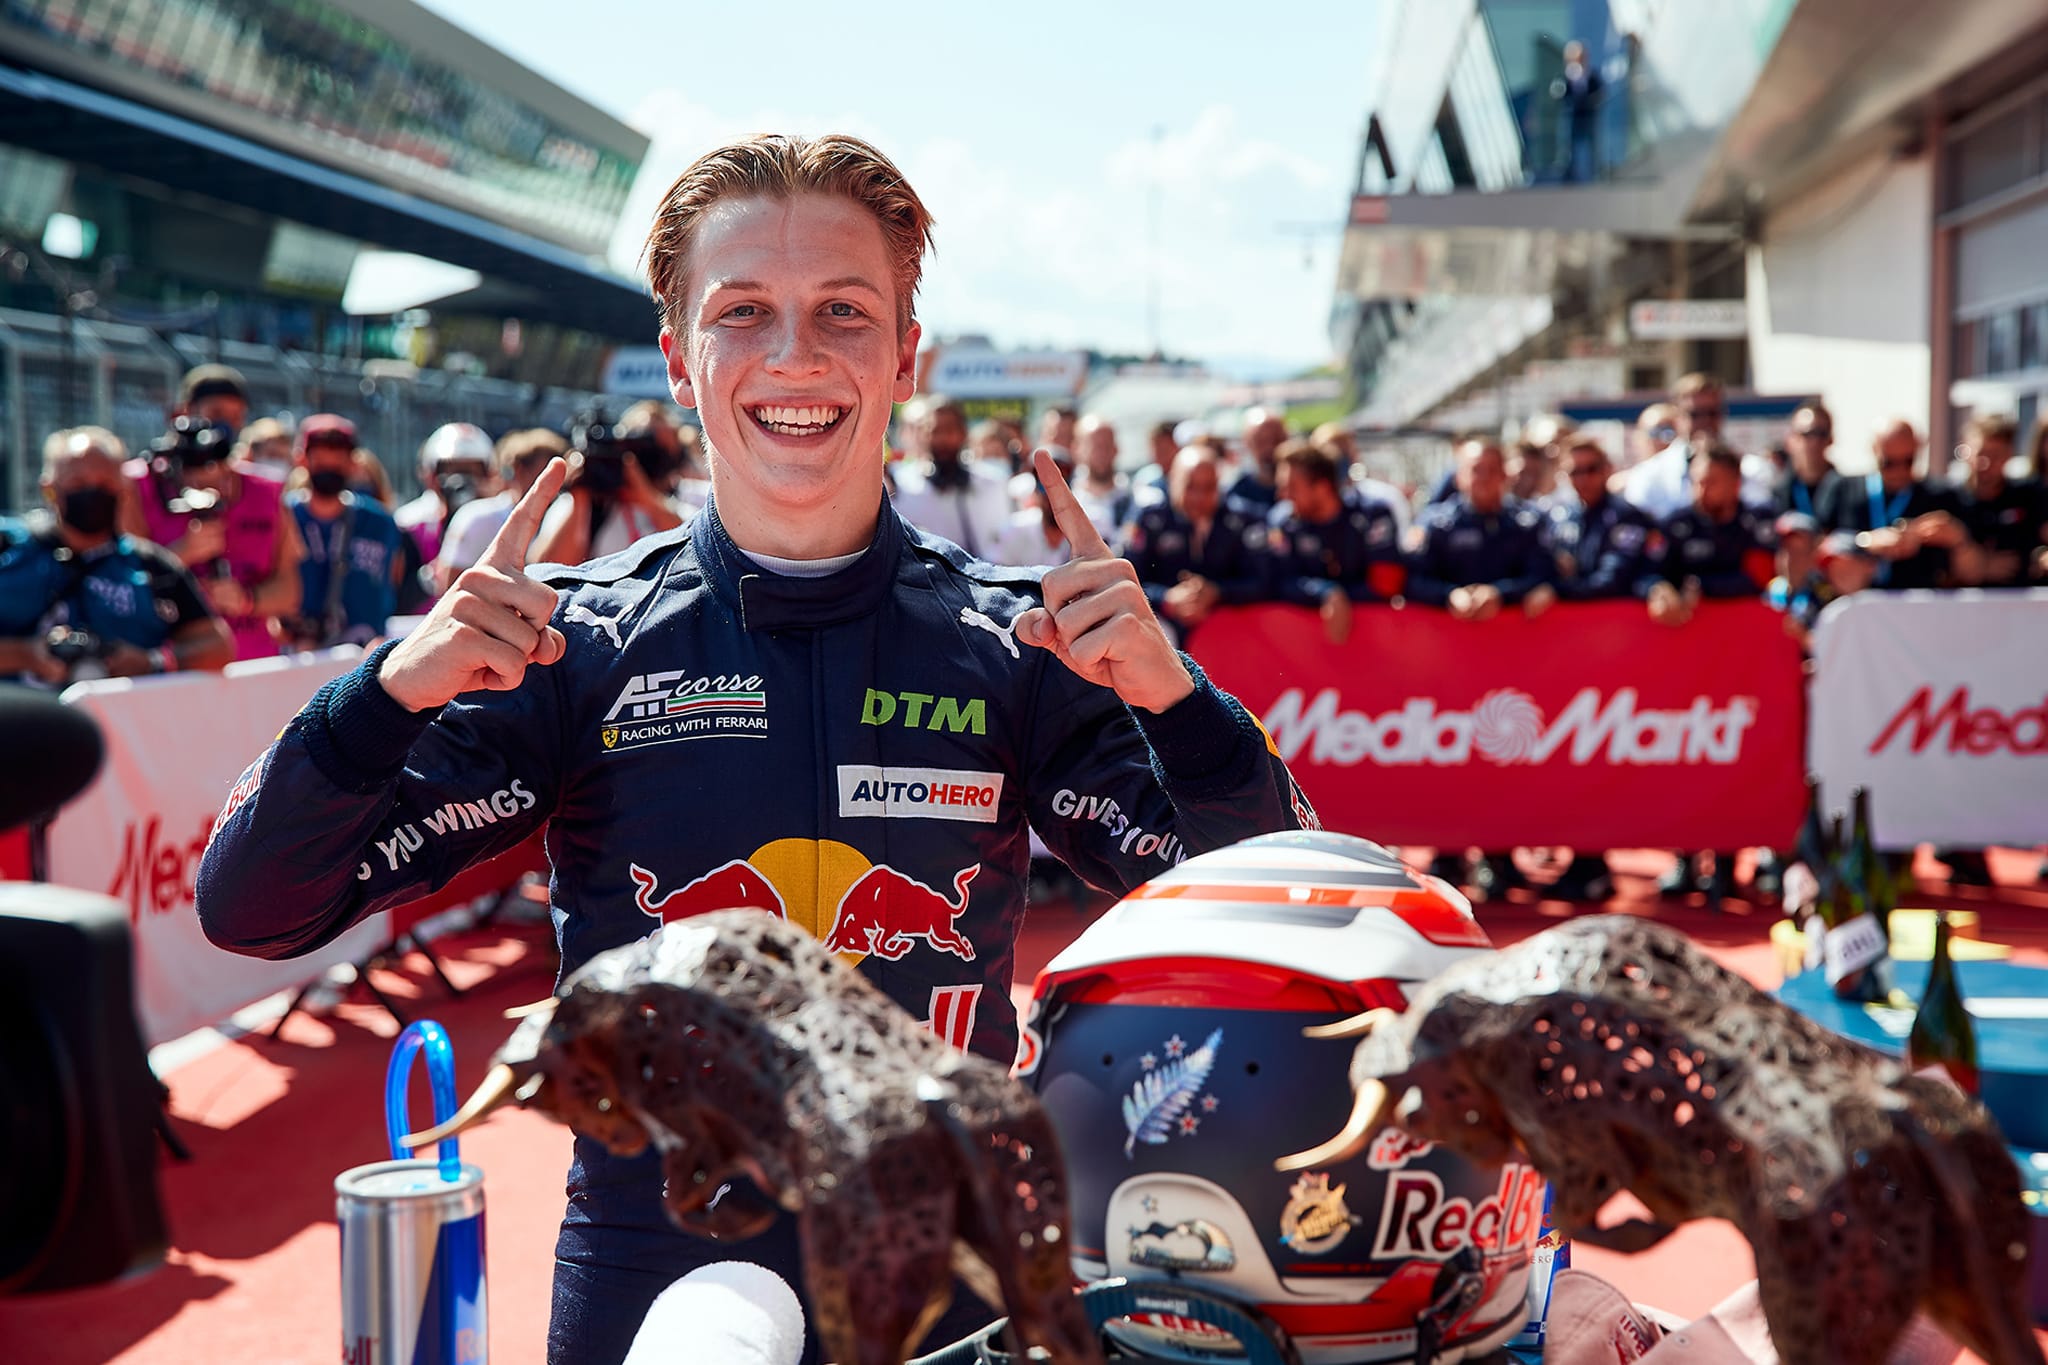 Double victory for Lawson at the Red Bull Ring